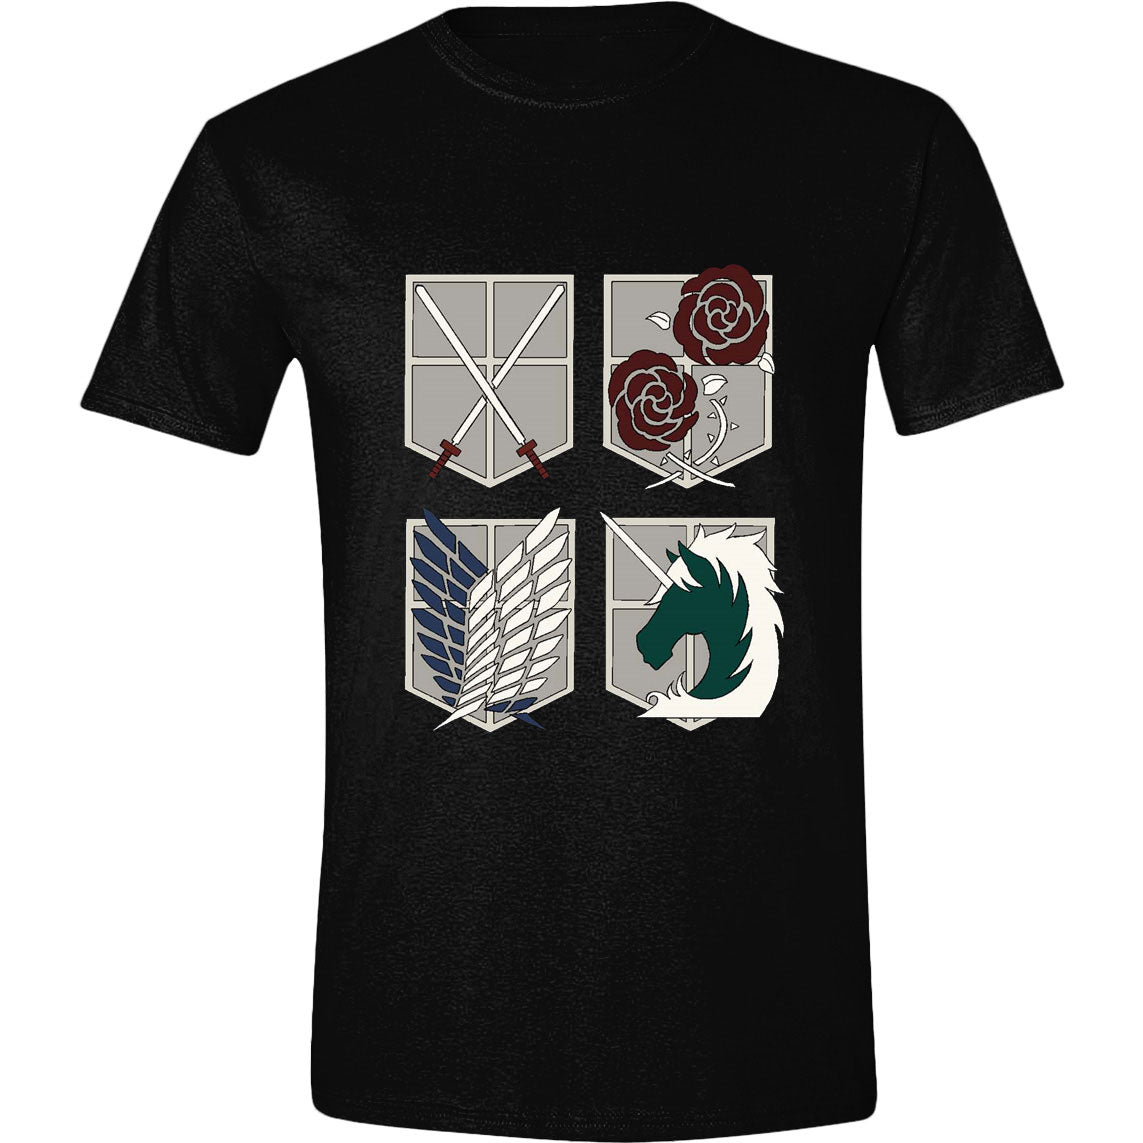 Attack On Titan T-Shirt Emblems Size S 5056318032825